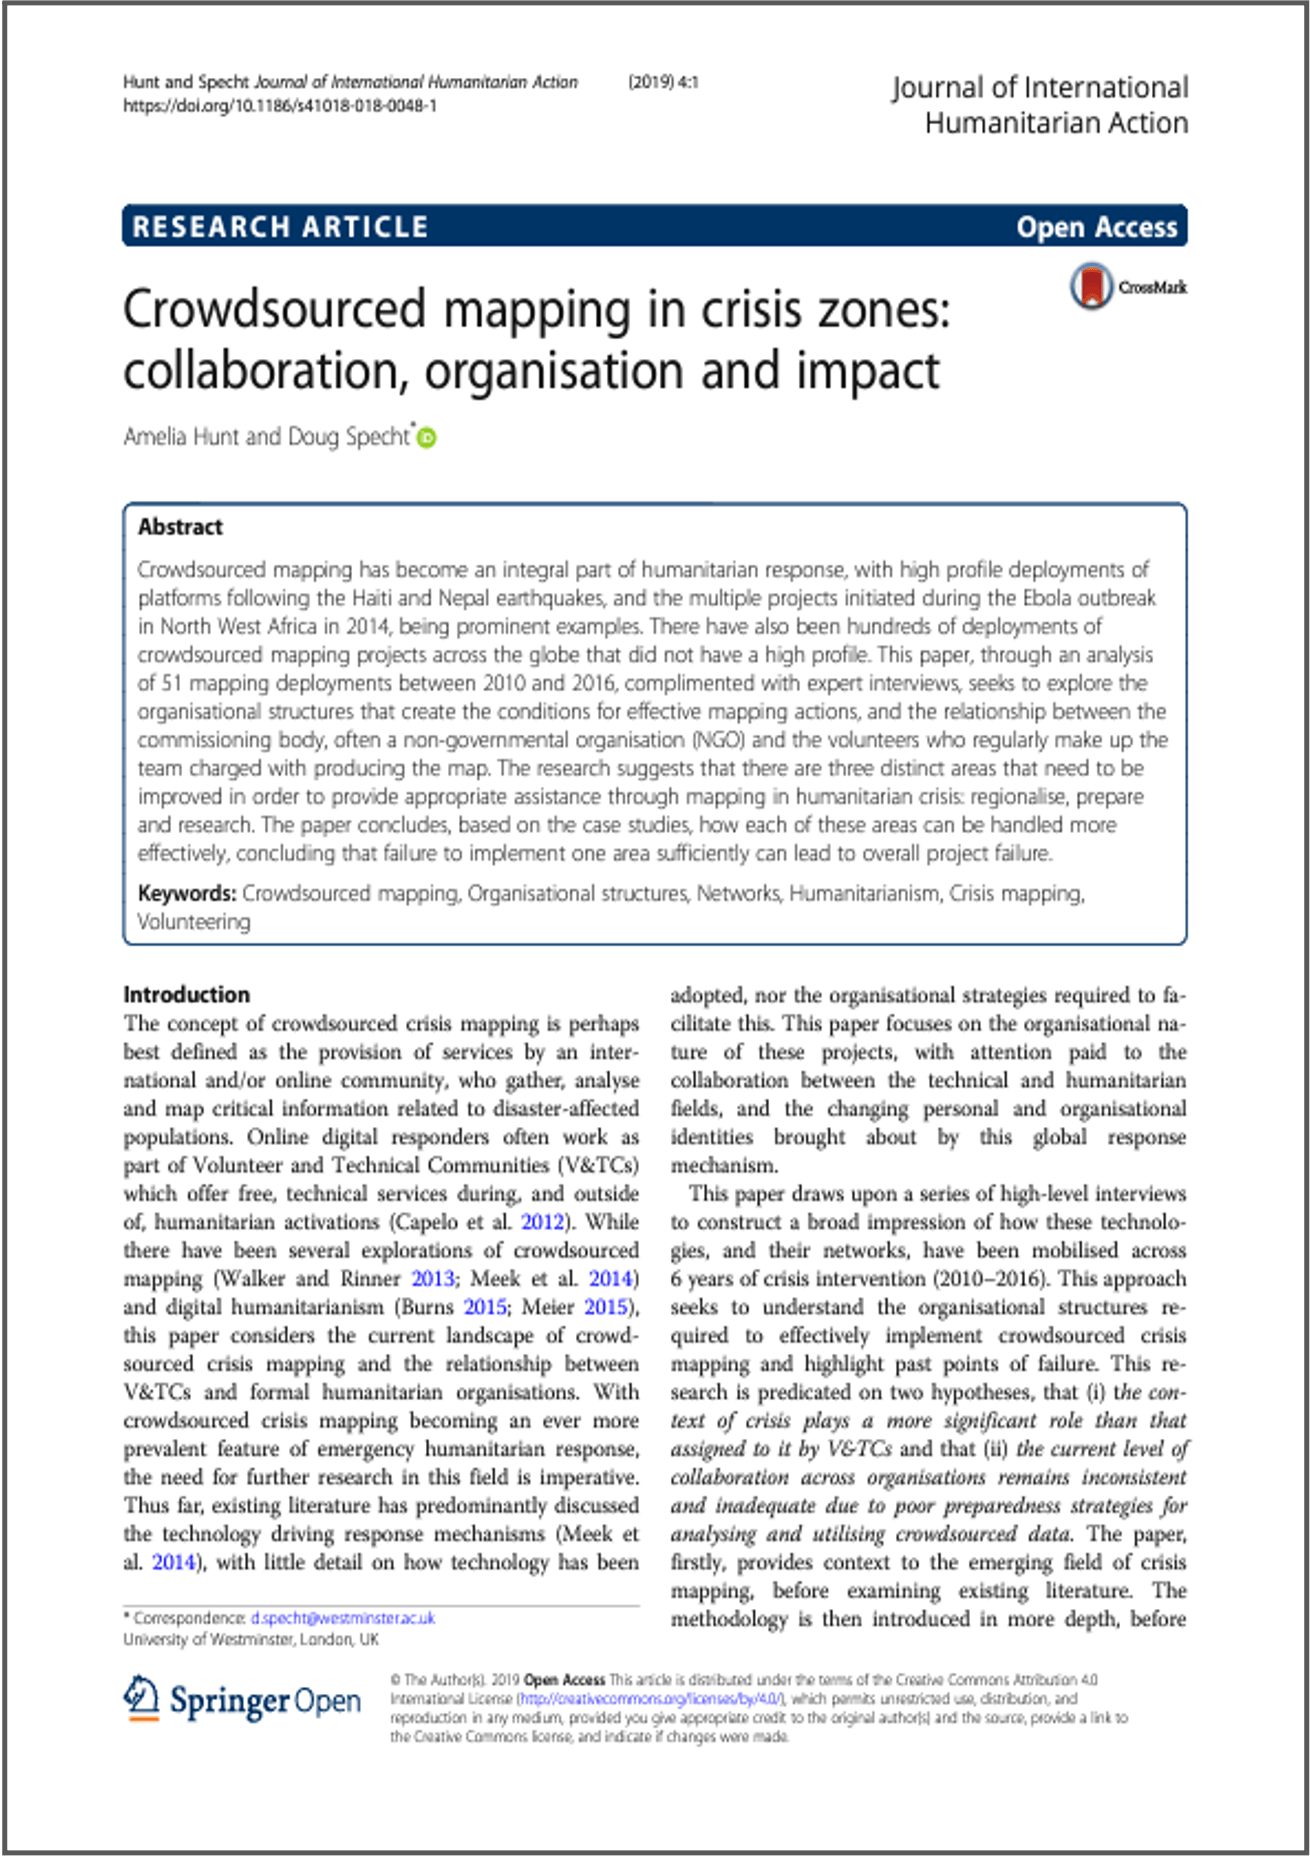  Crowdsourced mapping in crisis zones: collaboration, organisation and impact